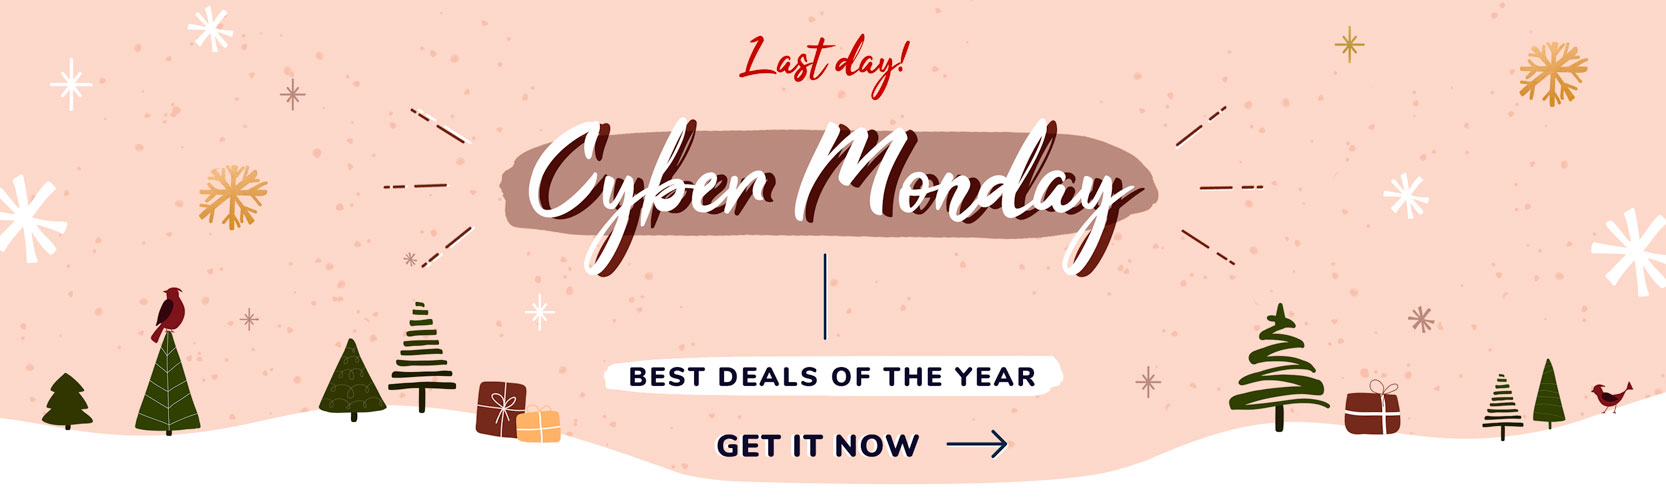 Day 12 of 12 Days of Sales: Cyber Sunday!